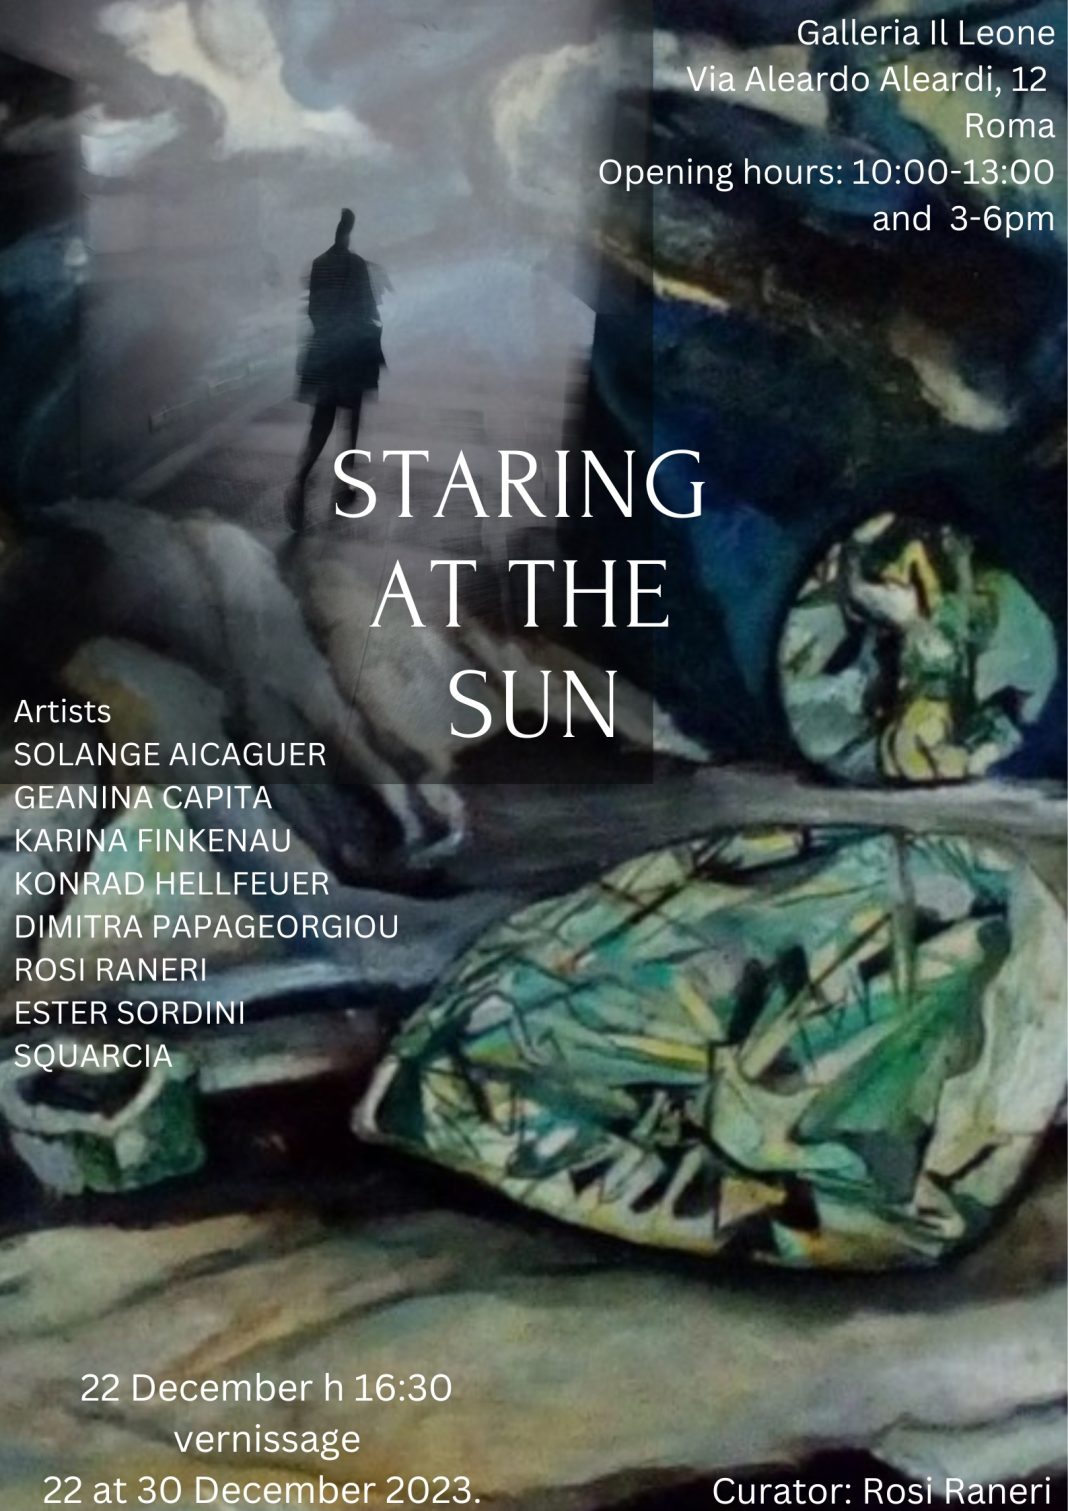 STARING AT THE SUNhttps://www.exibart.com/repository/media/formidable/11/img/48a/STARING-AT-THE-SUN--1068x1511.jpg